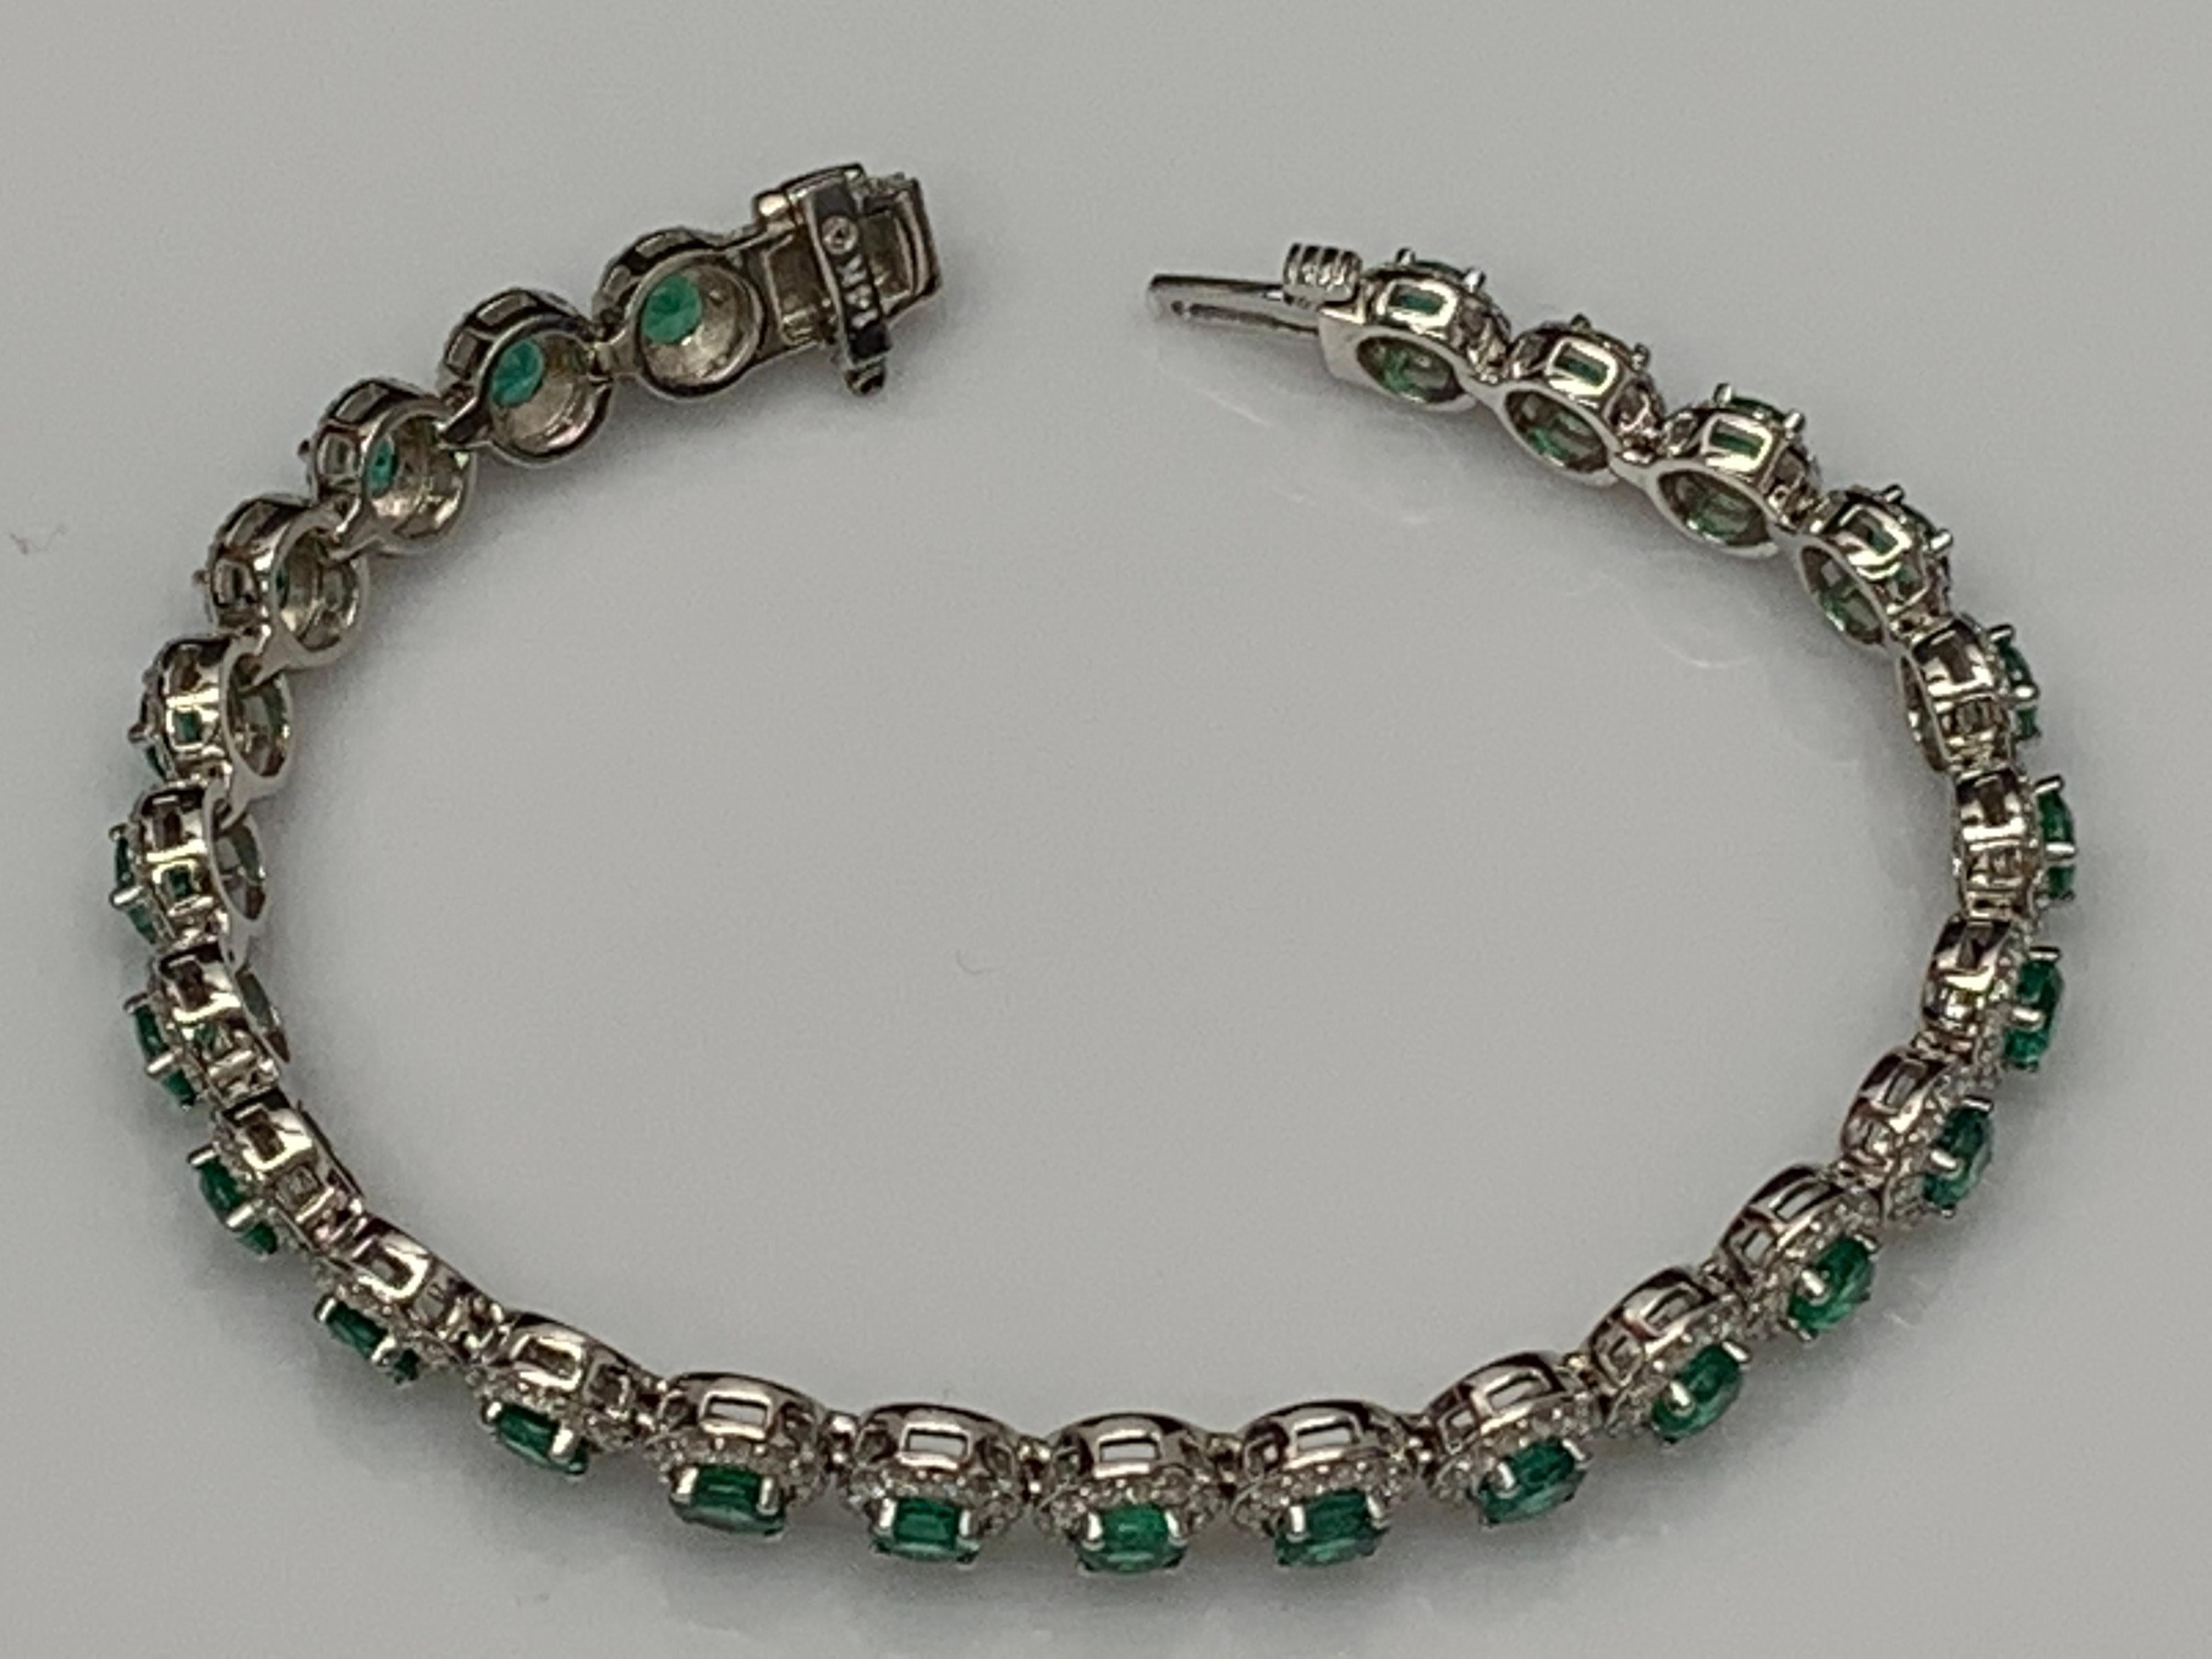 6.94 Carat Emerald and Diamond Halo Tennis Bracelet in 14k White Gold For Sale 4